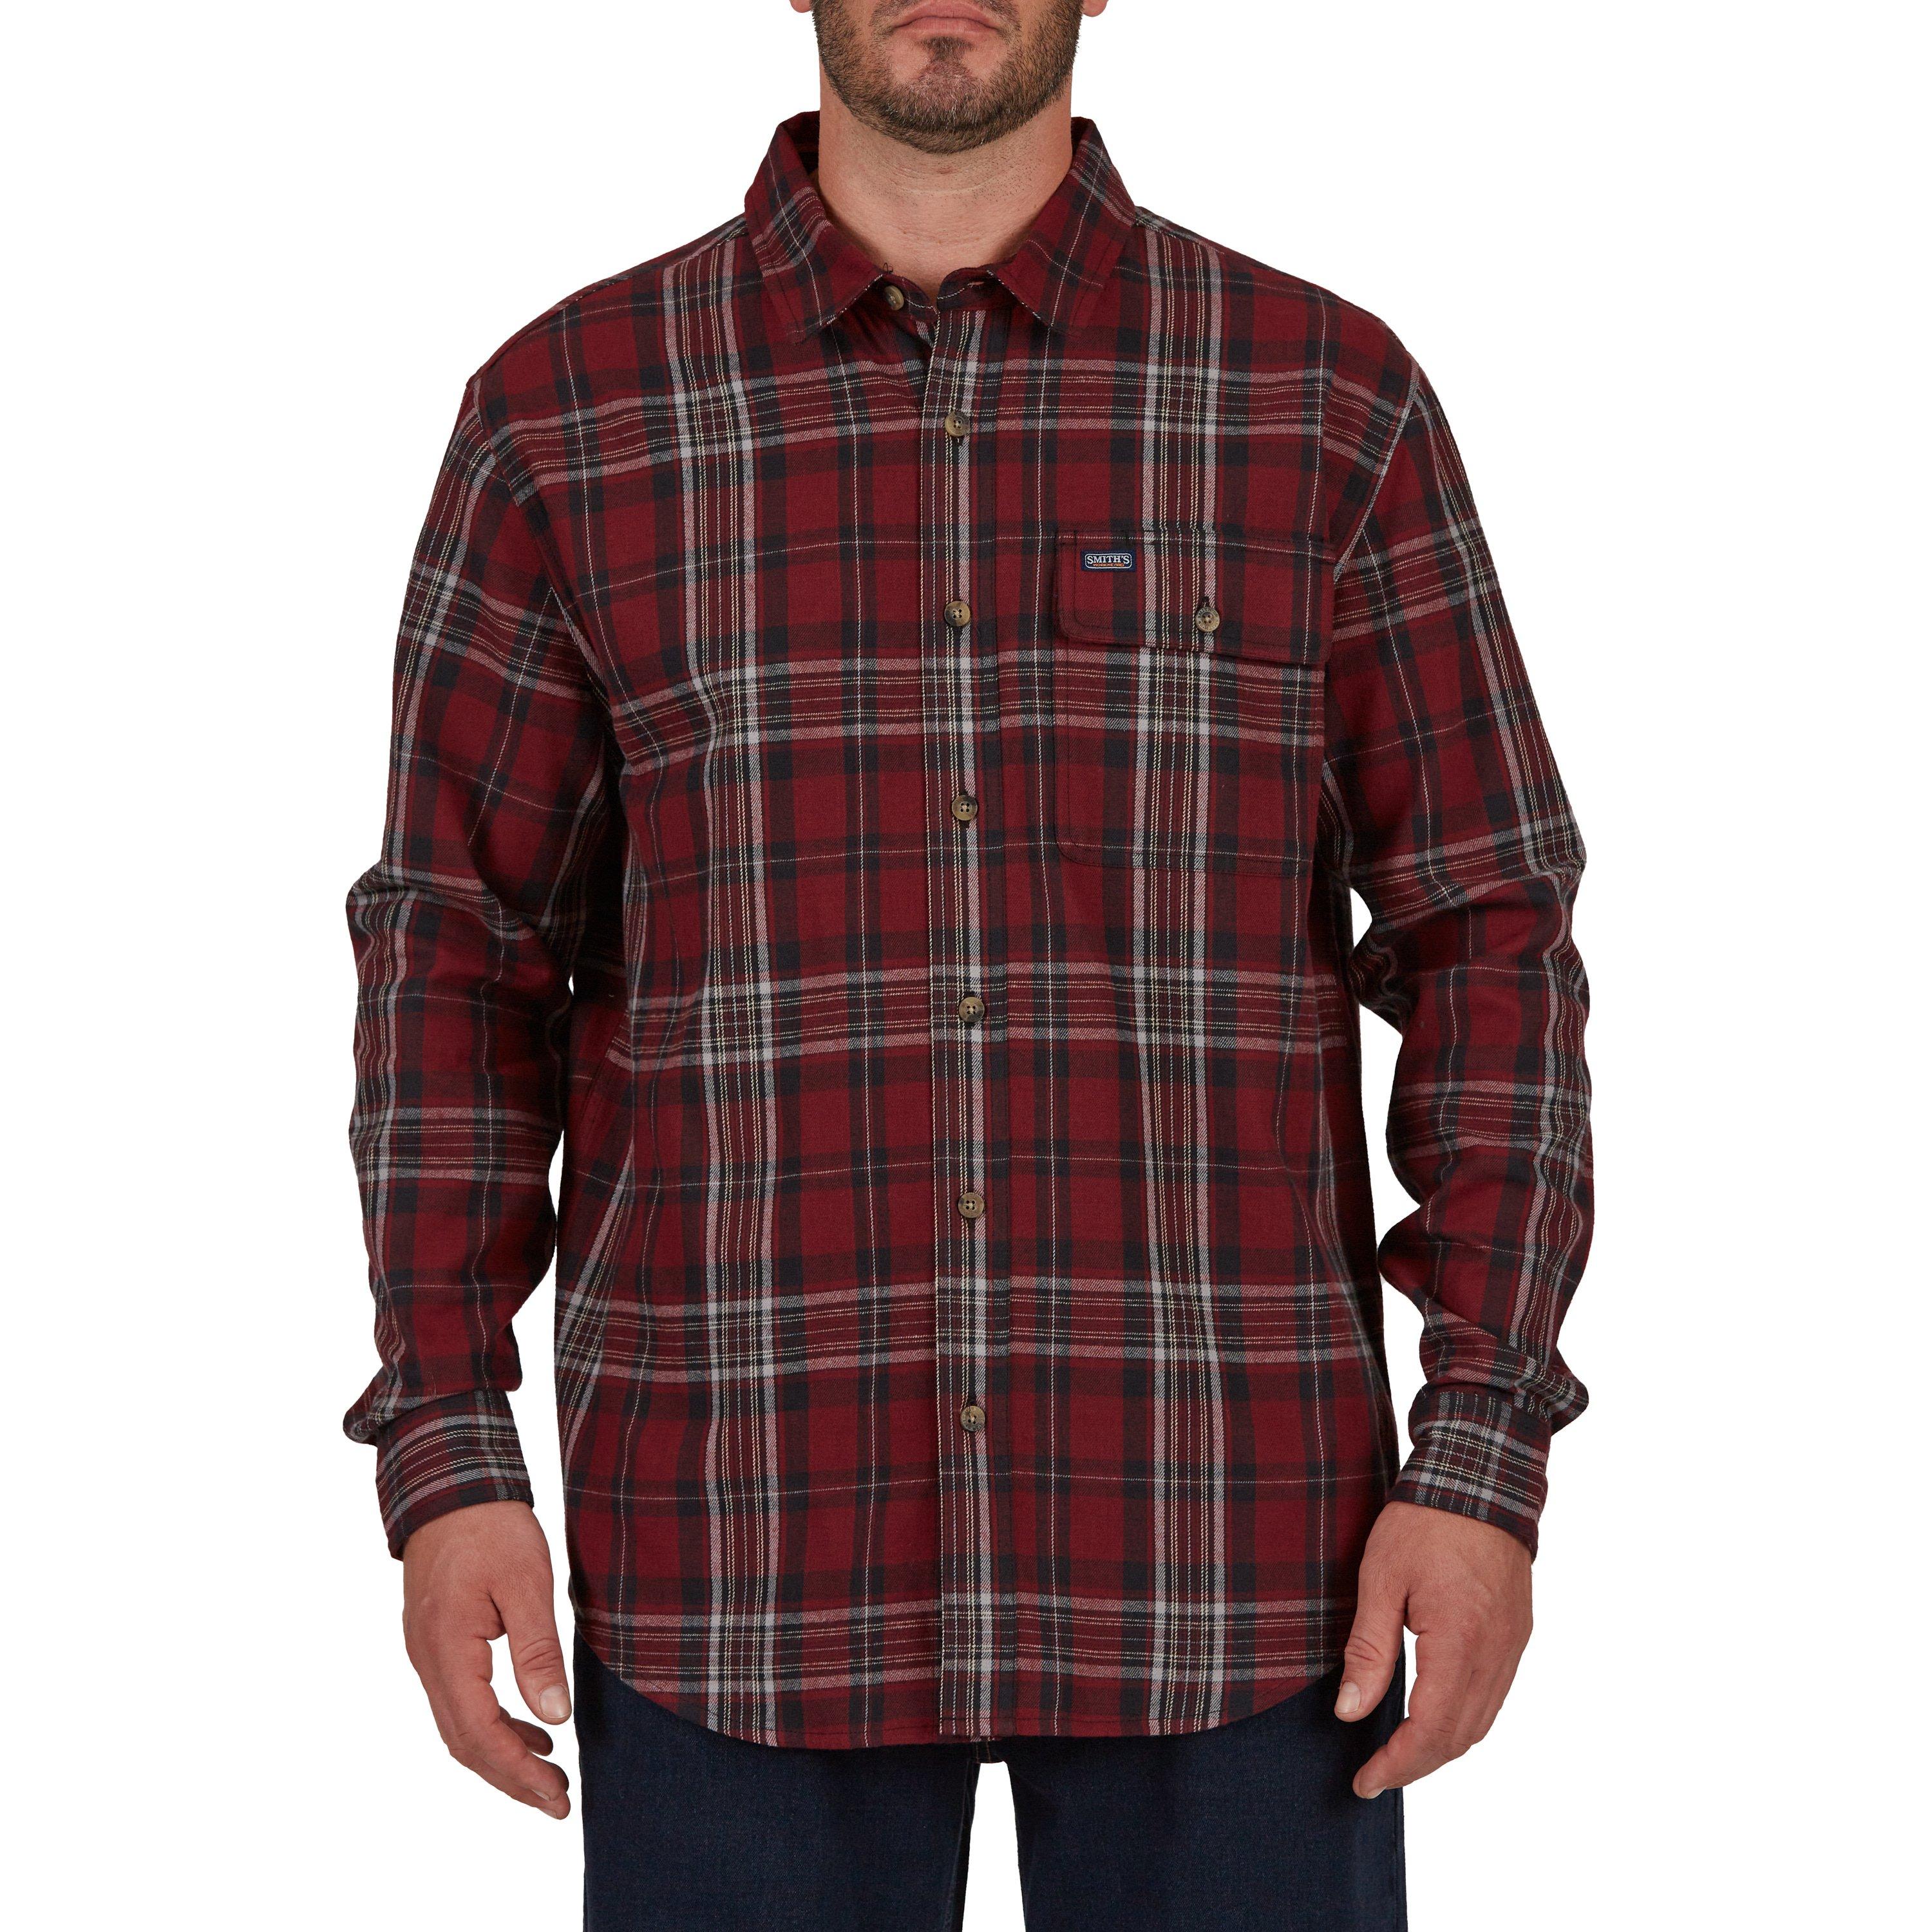 Smith's Workwear Plaid Pocket Flannel Button-Up Shirt